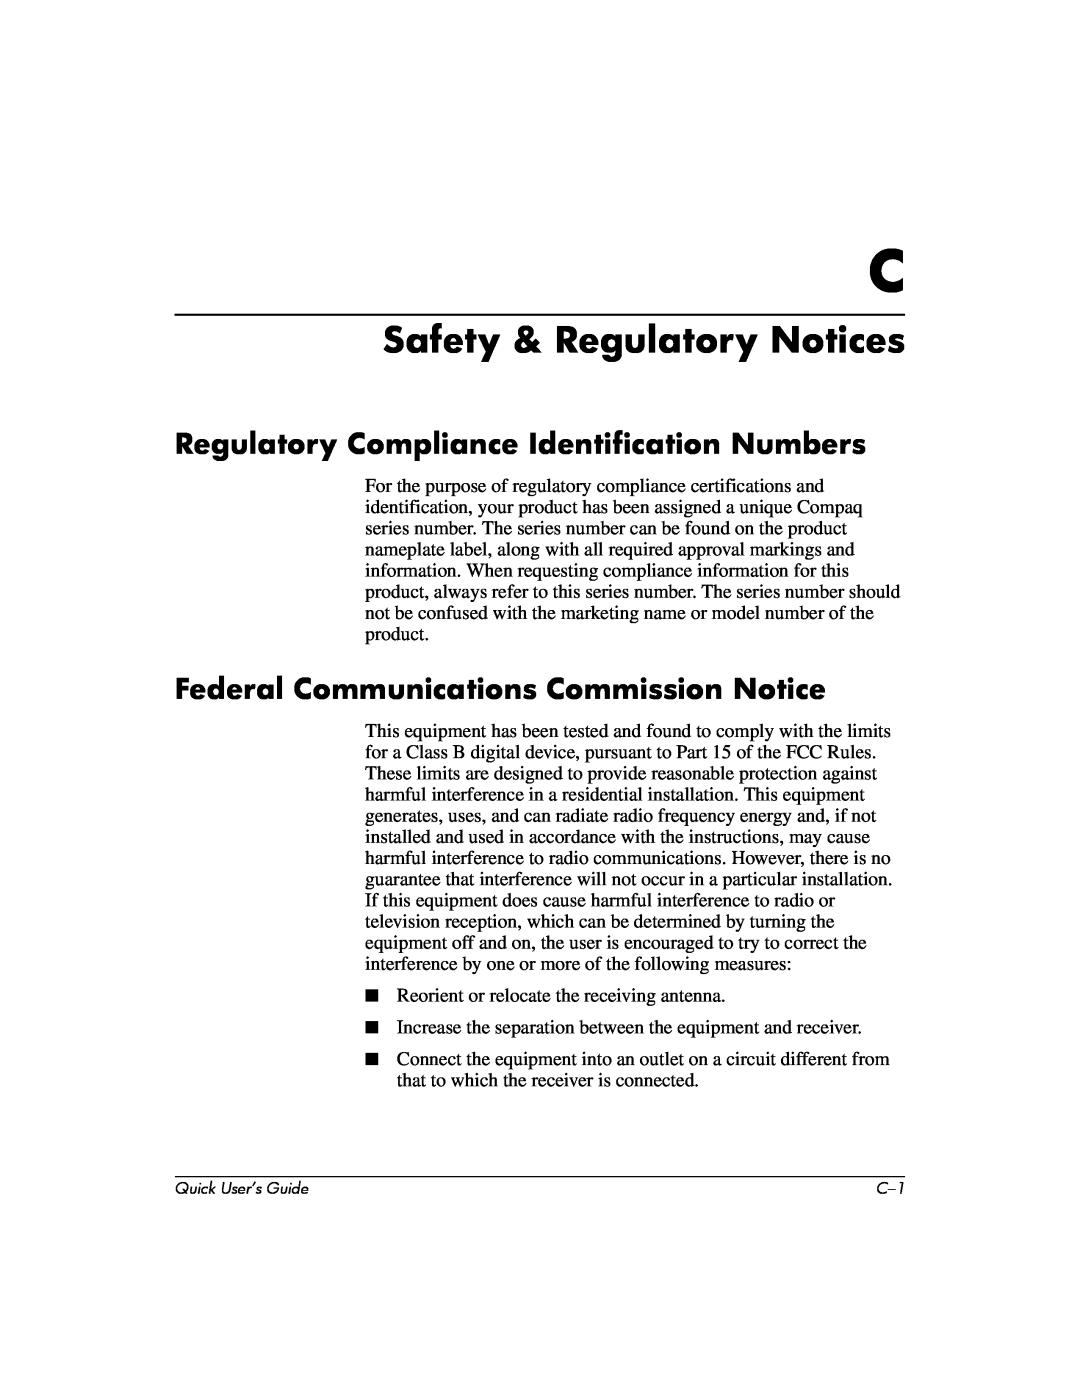 Compaq D510 e-pc manual Safety & Regulatory Notices, Regulatory Compliance Identification Numbers 